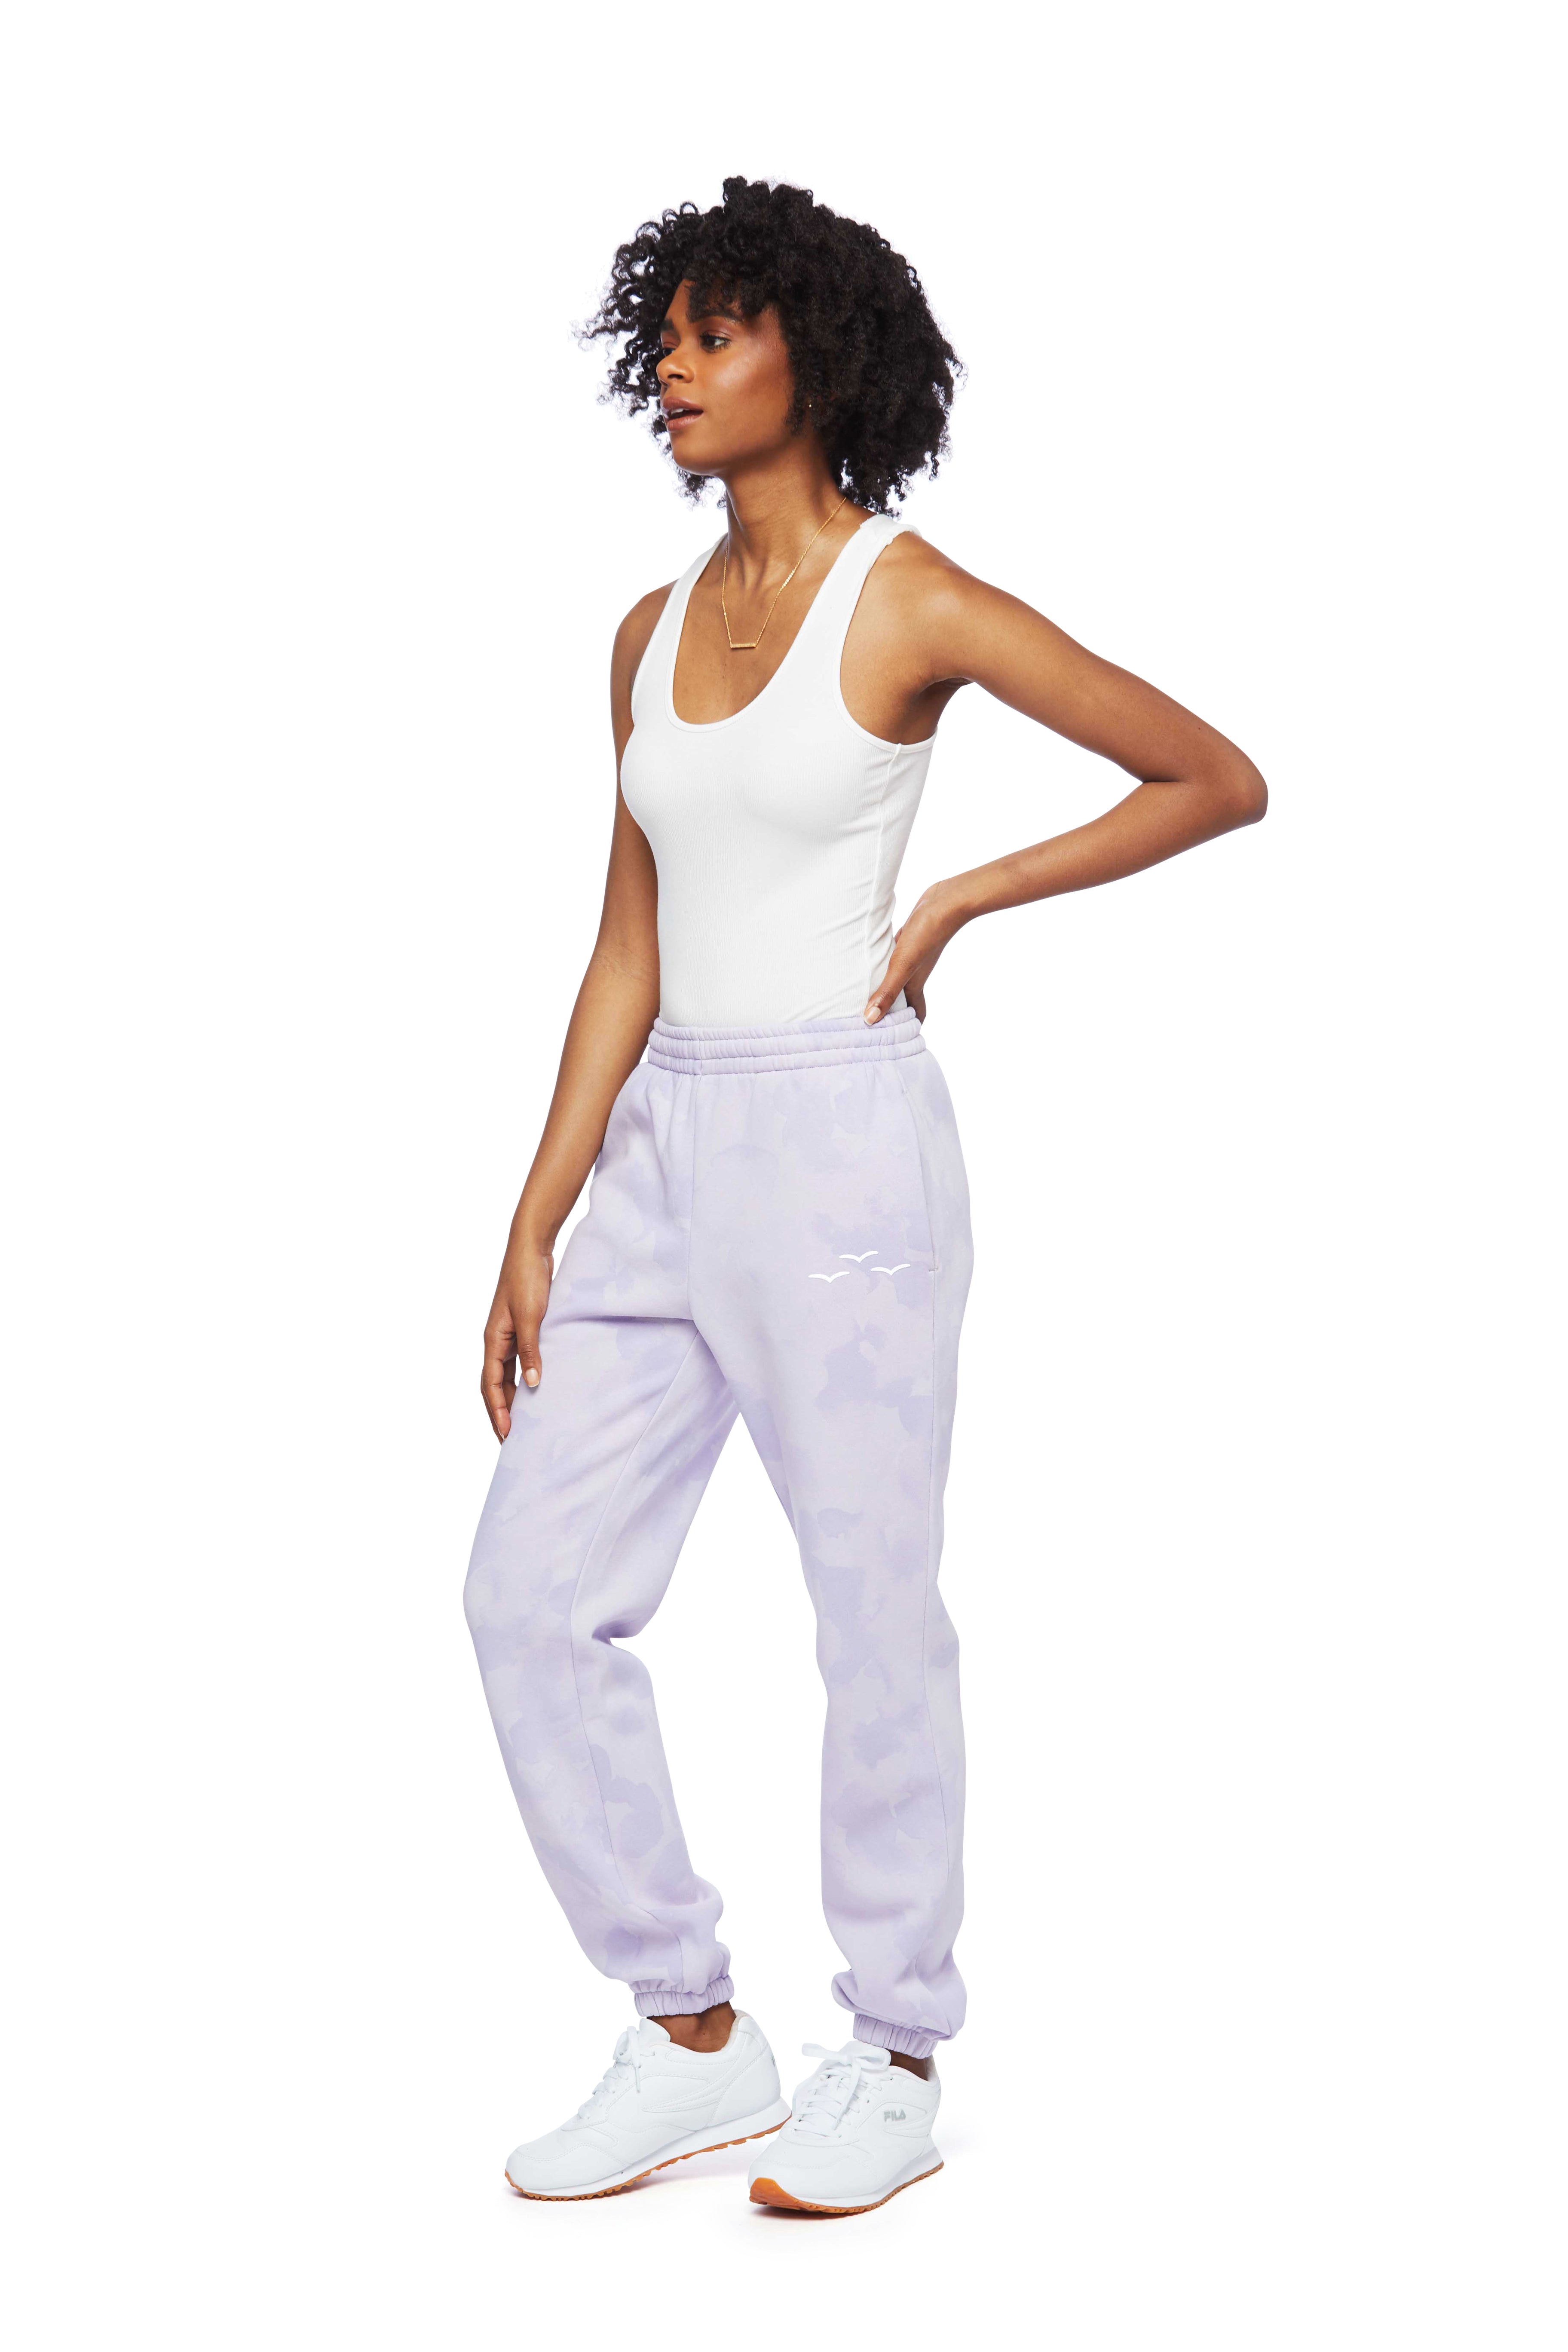 Simmi Clothing Simmi exclusive kick flare jogger in lavender - ShopStyle  Activewear Trousers